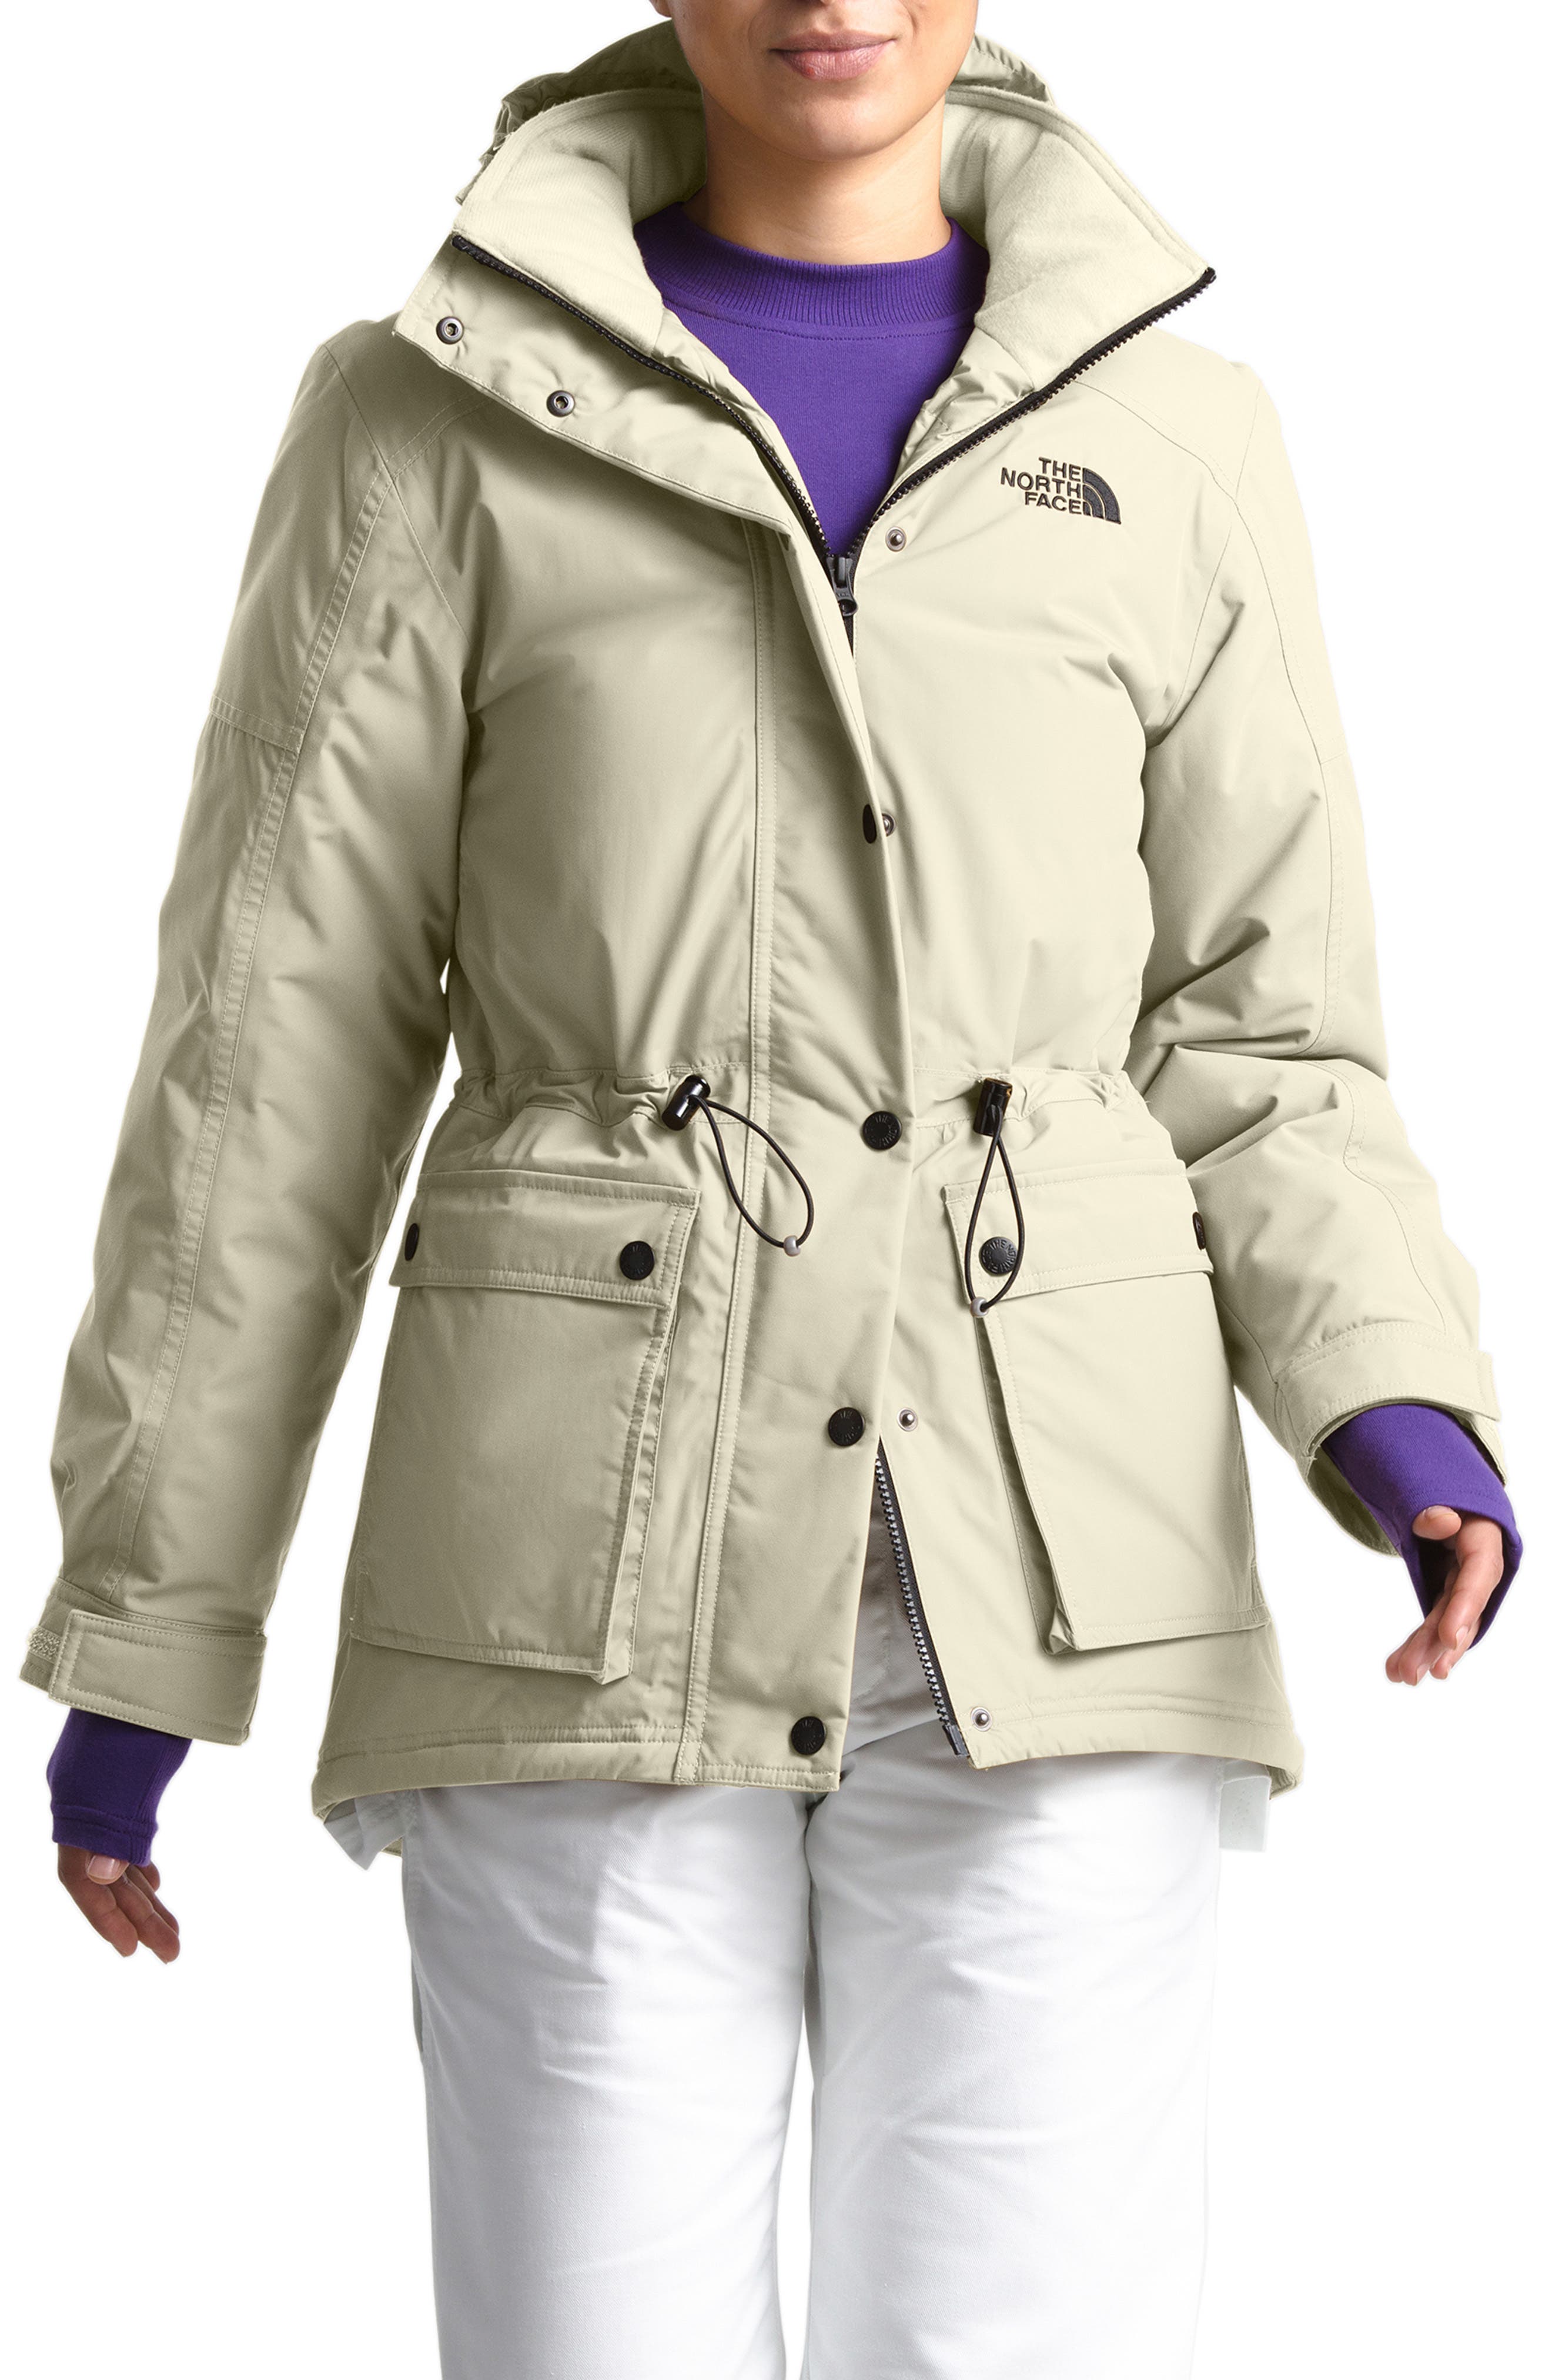 snow down parka north face